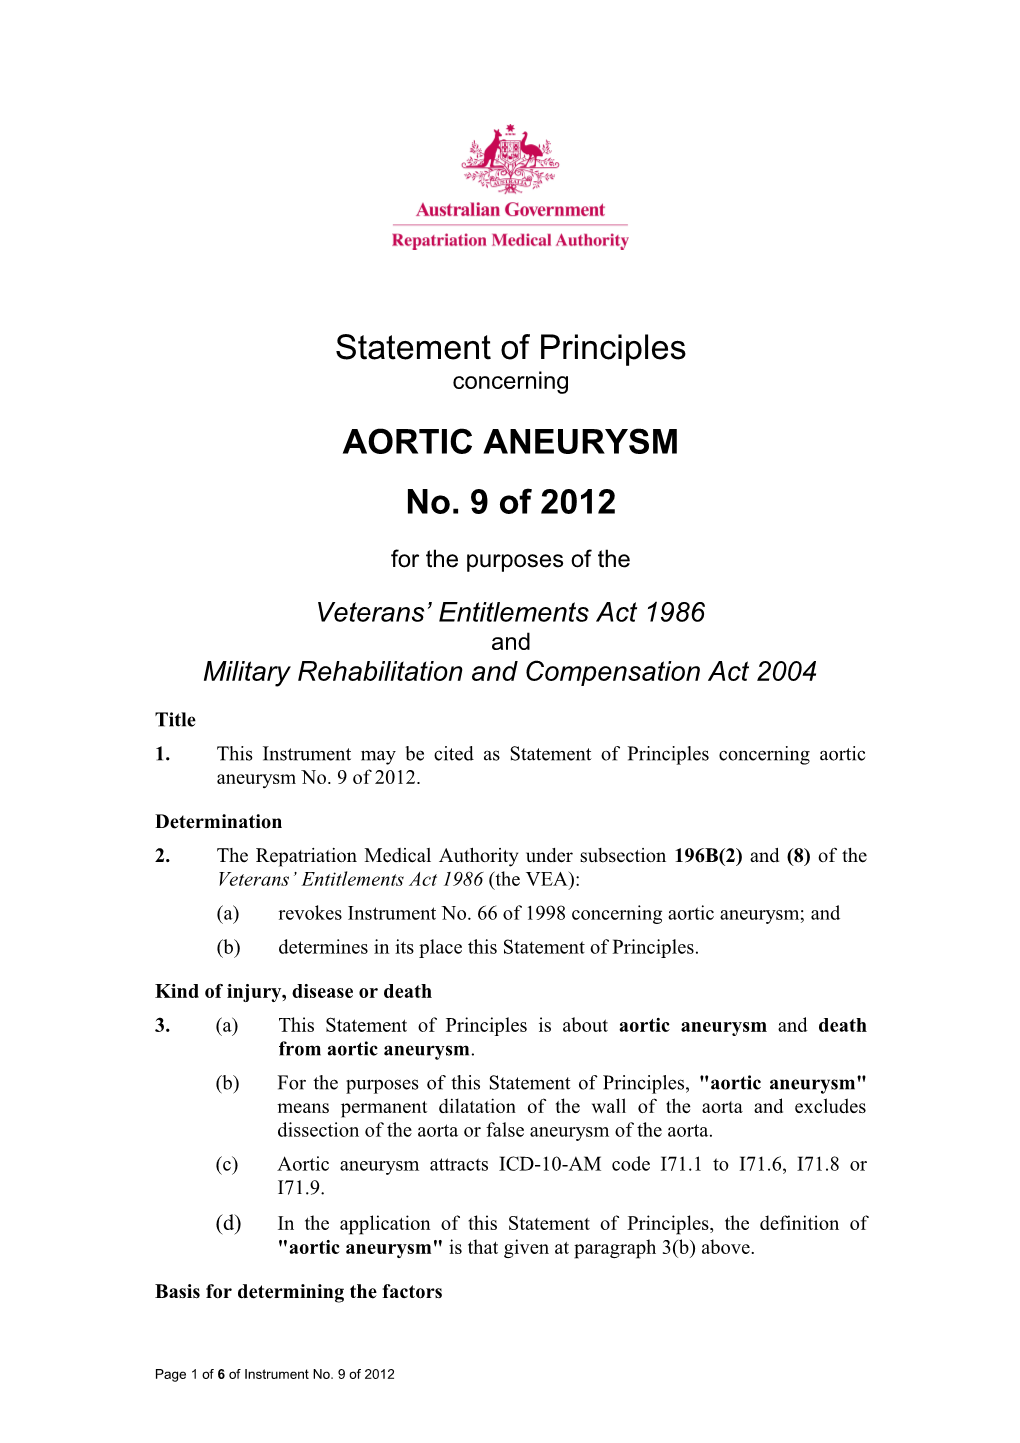 Statement of Principles 9 of 2012 Aortic Aneurysm Reasonable Hypothesis